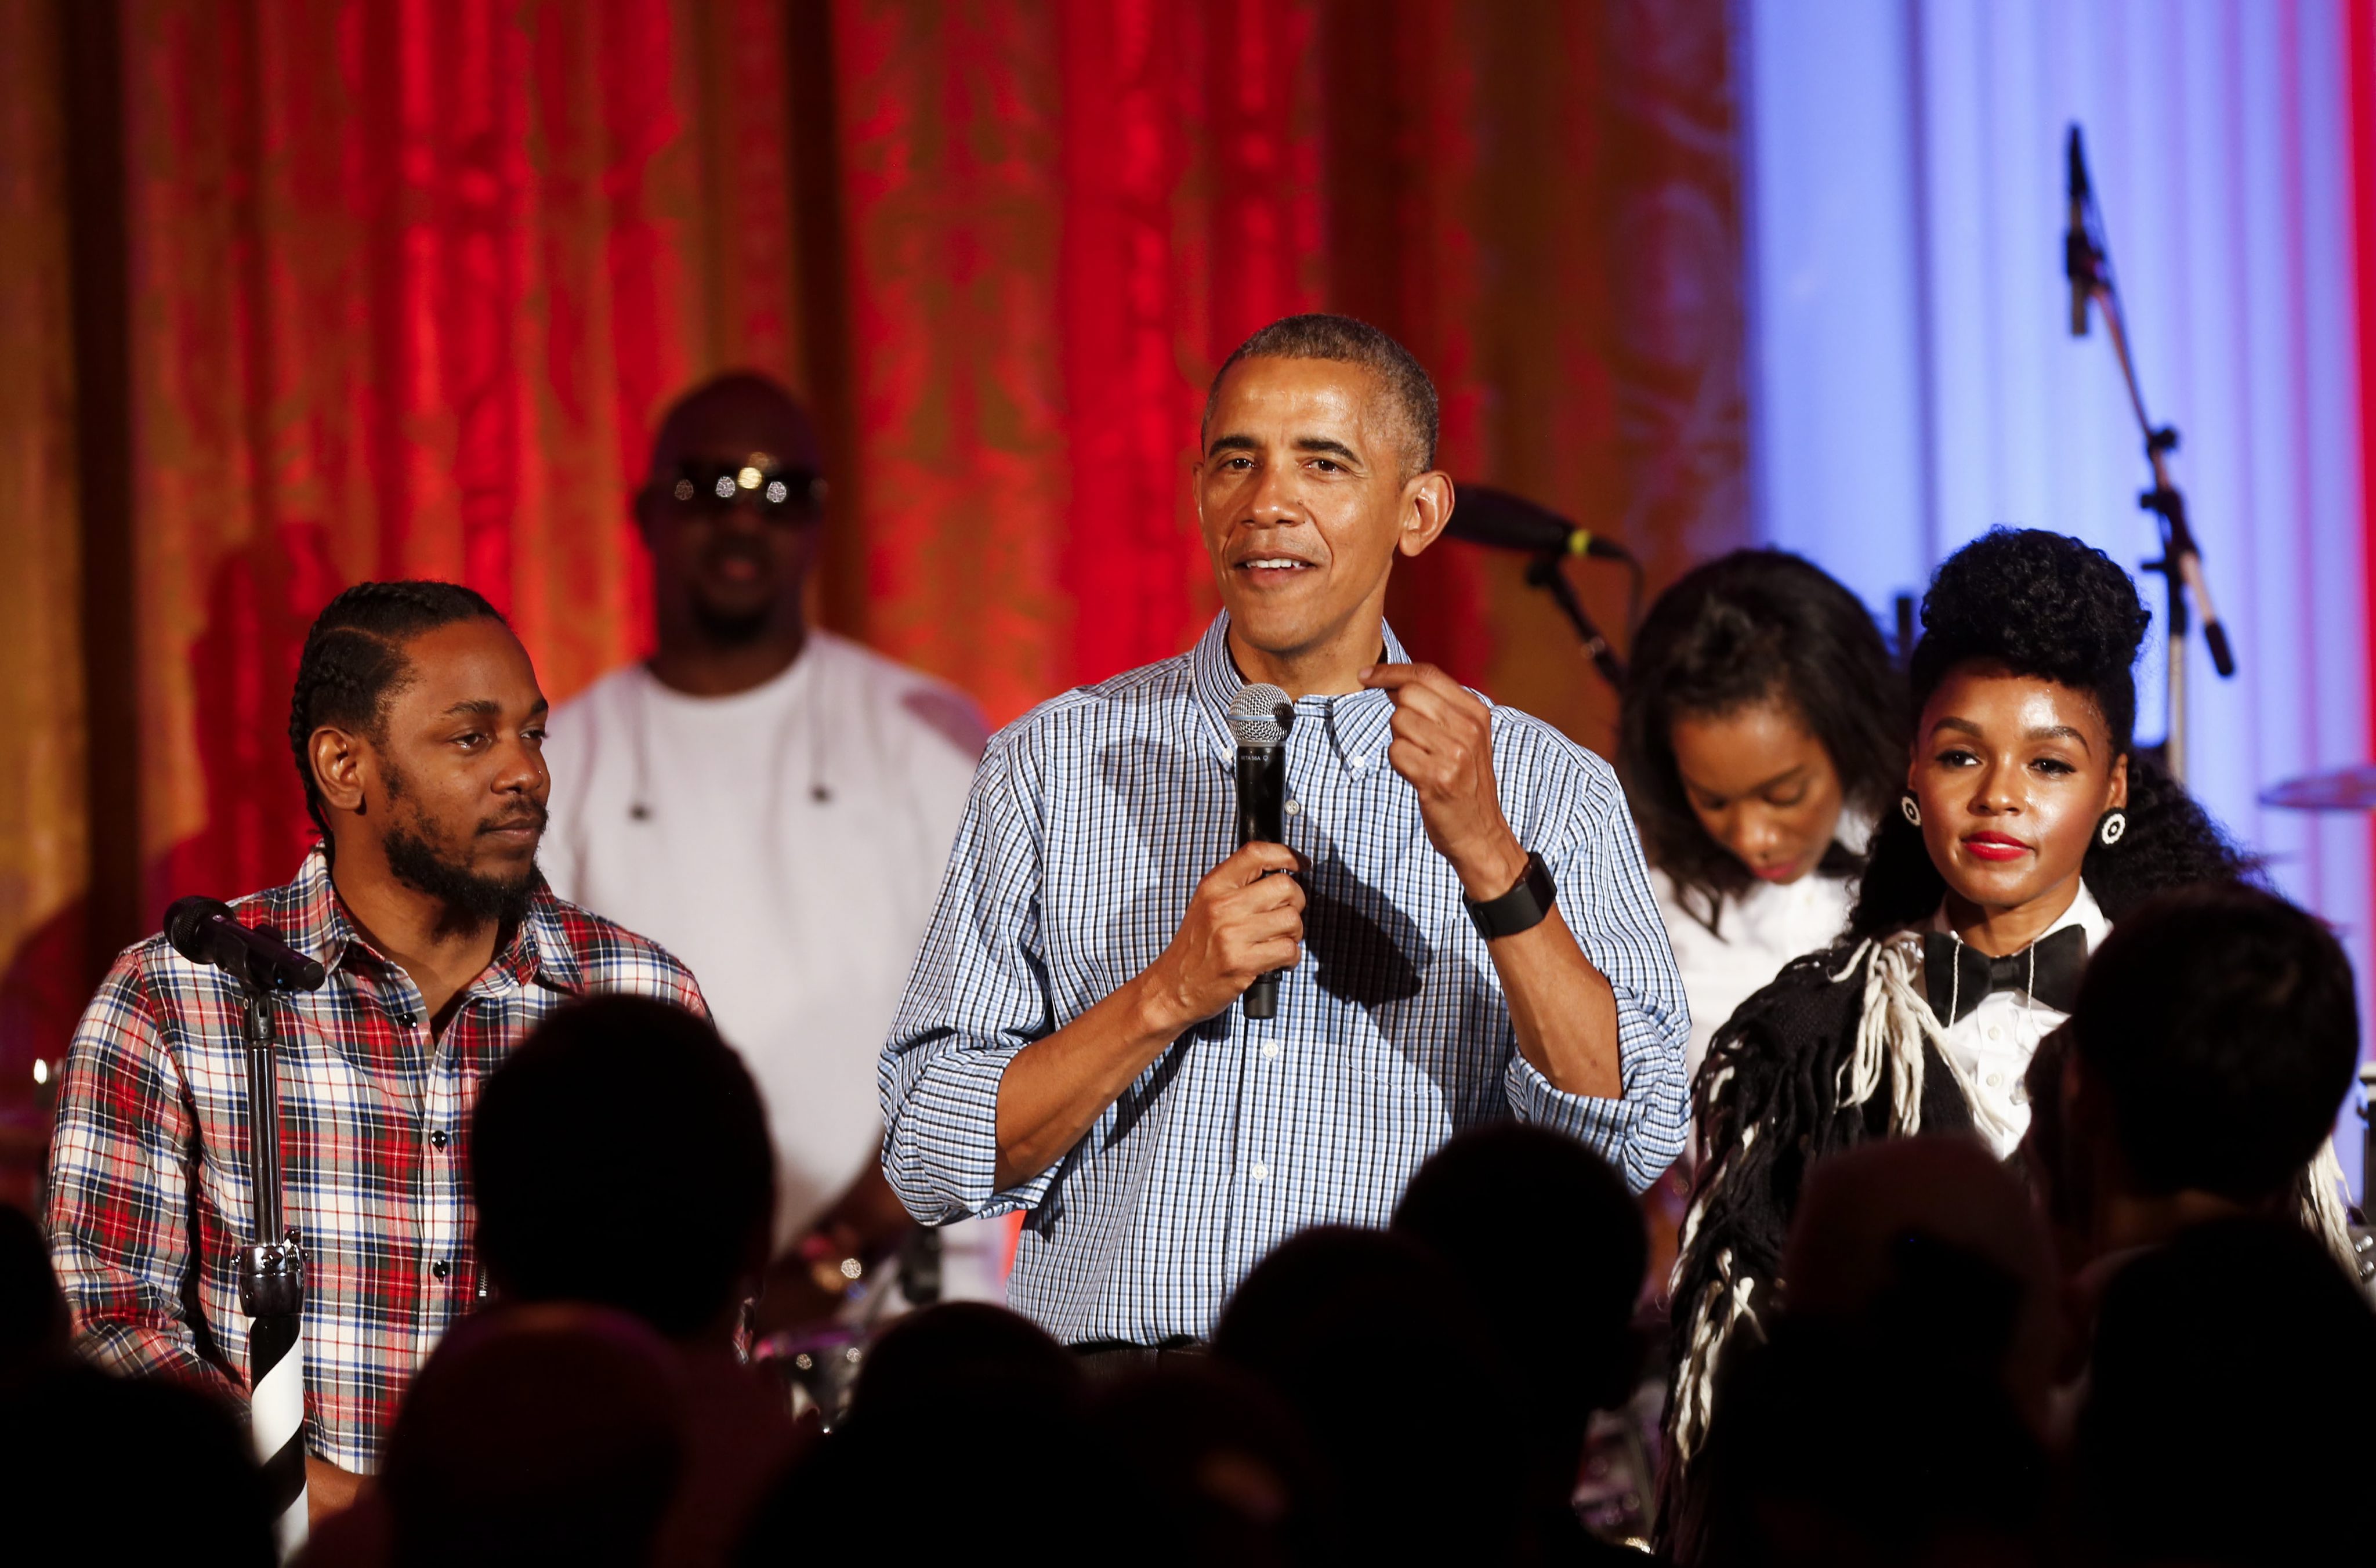 2016-07-04 19:00:40 epa05408052 US President Barack Obama (C) speaks while US singer Janelle Monae (R) and US singer Kendrick Lamar (L) listen during the Fourth of July White House party in the East room of the White House, Washington, DC, USA, 04 July 2016. Malia was born 18 years ago. Guests at the party included military families and staff and their families from throughout the administration. Because of the rain, the party was moved from the South Lawn to the East Room of the White House. EPA/AUDE GUERRUCCI/POOL